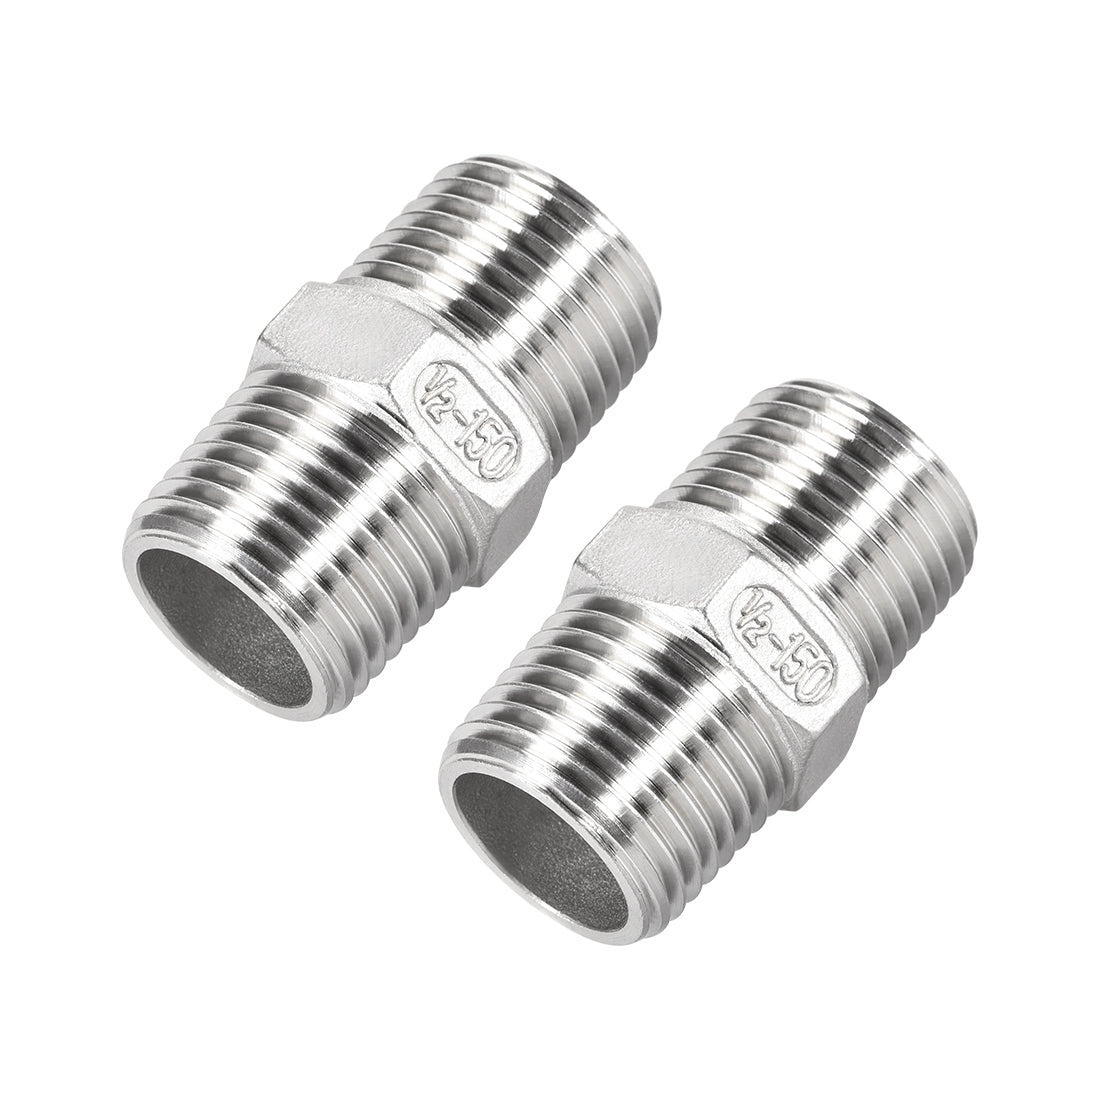 uxcell Uxcell Stainless Steel 304 Cast Pipe Fittings Coupling 1/2 x 1/2 G Male 2pcs